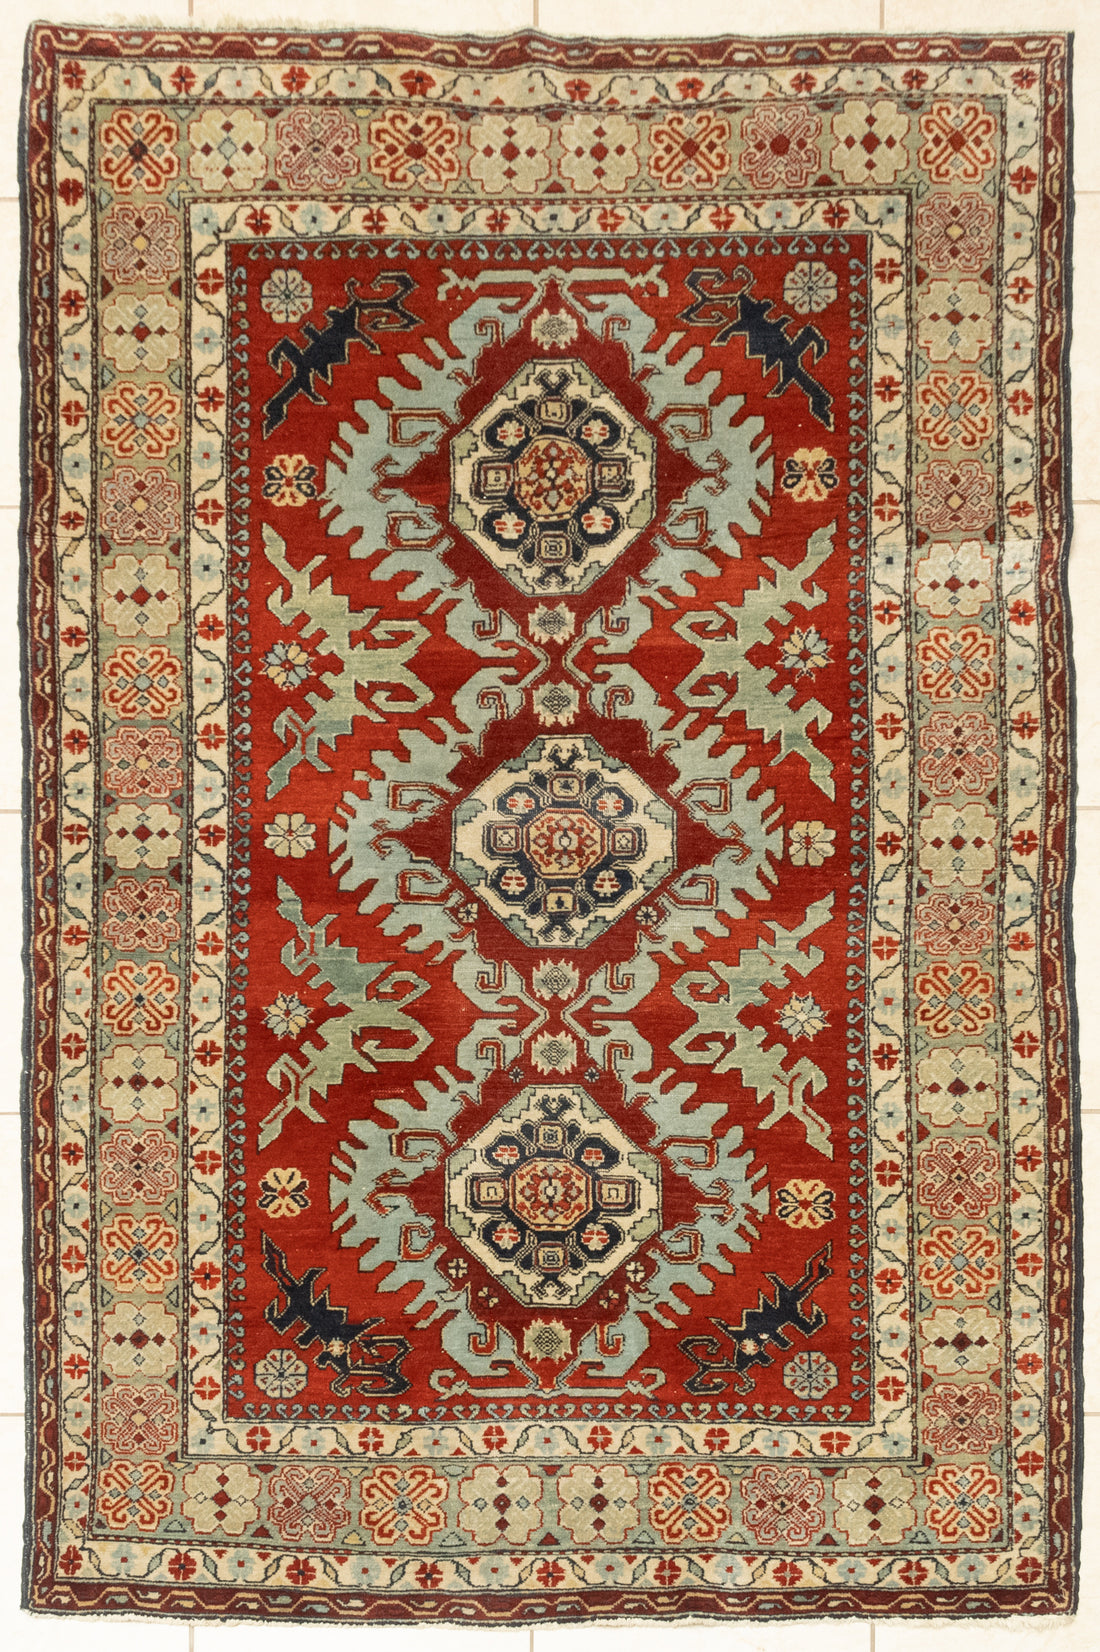 Hand-Knotted Wool Rug 7'10" x 4'7"